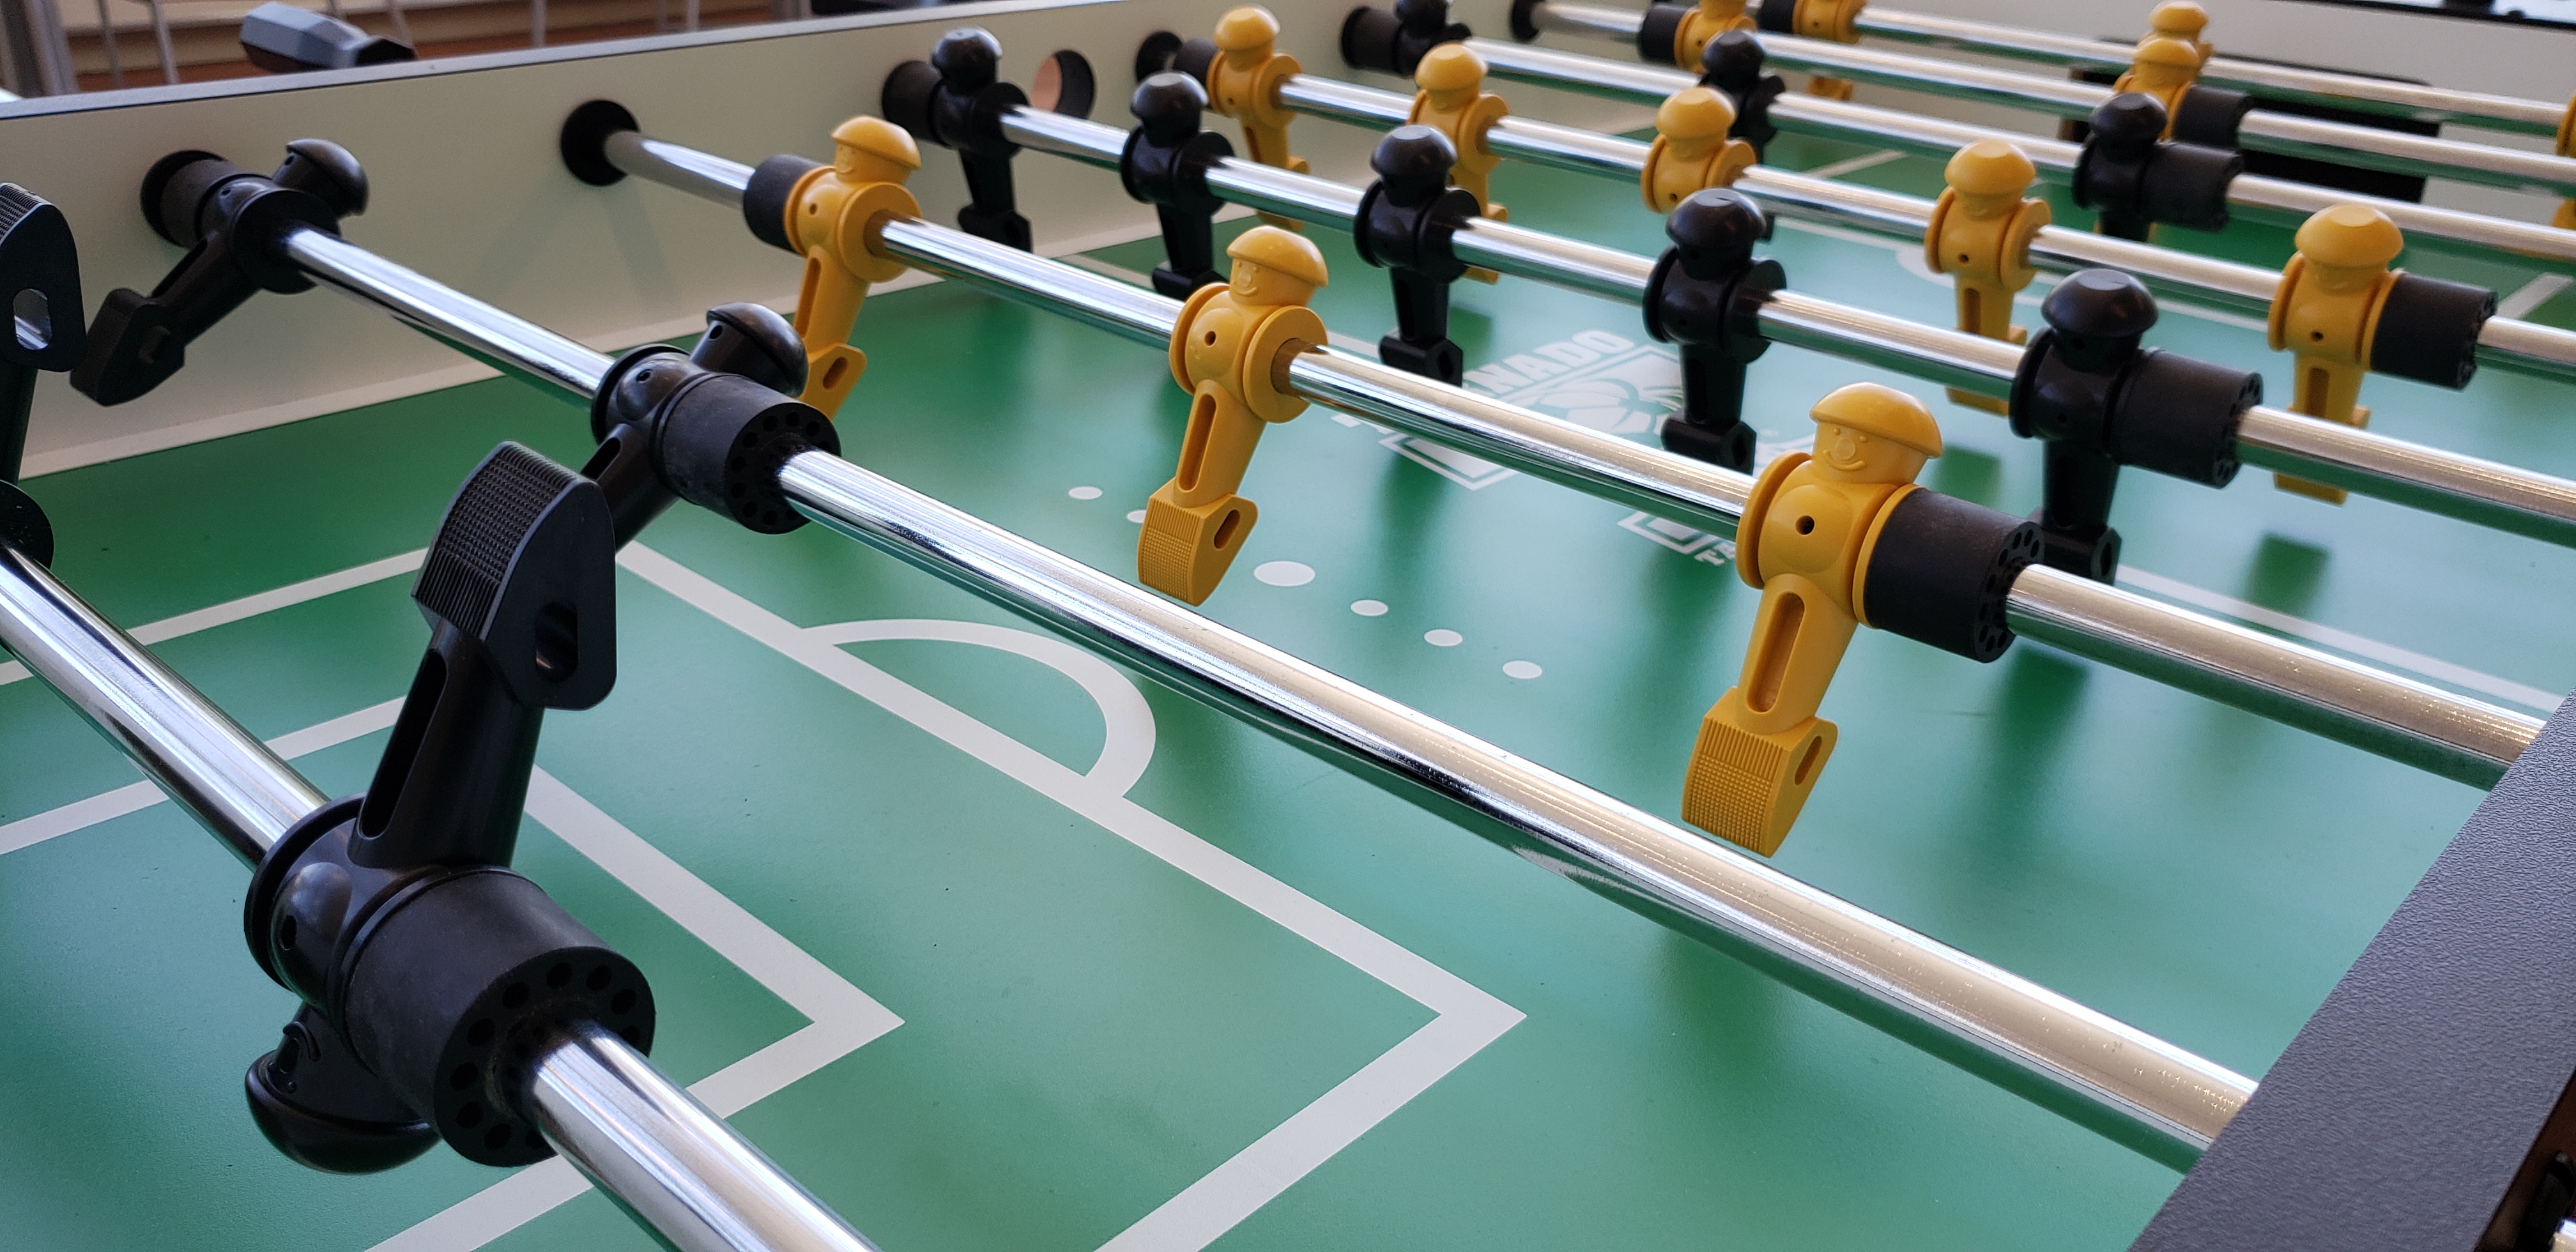 Game tables serve up fun in the Student Center